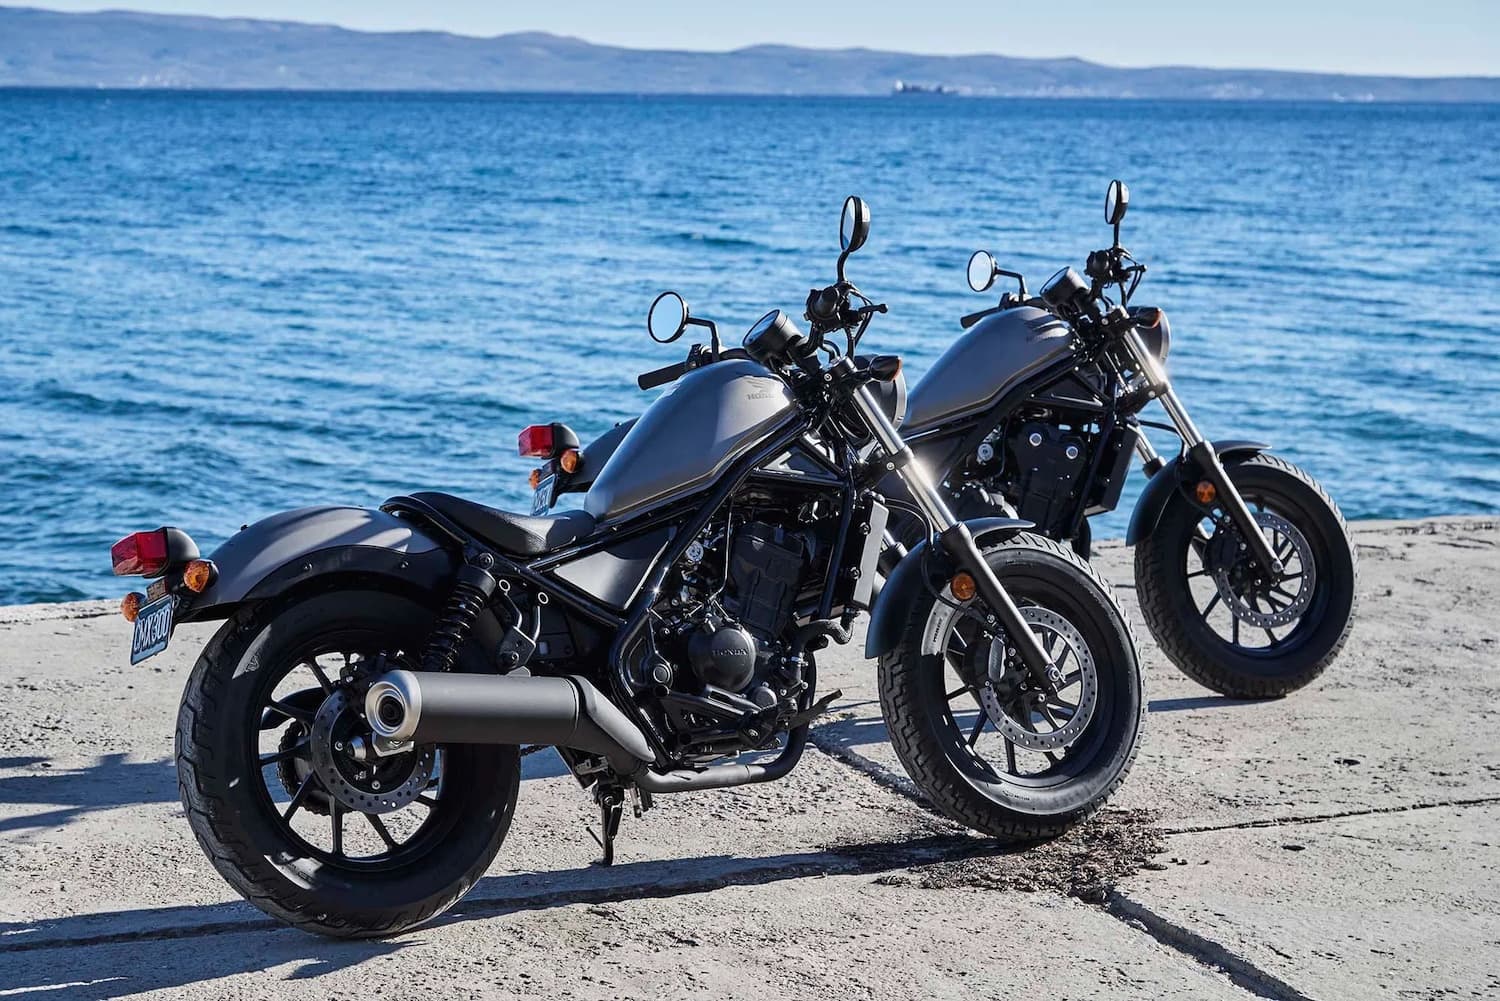 Honda Rebel 300 and 500 side by side